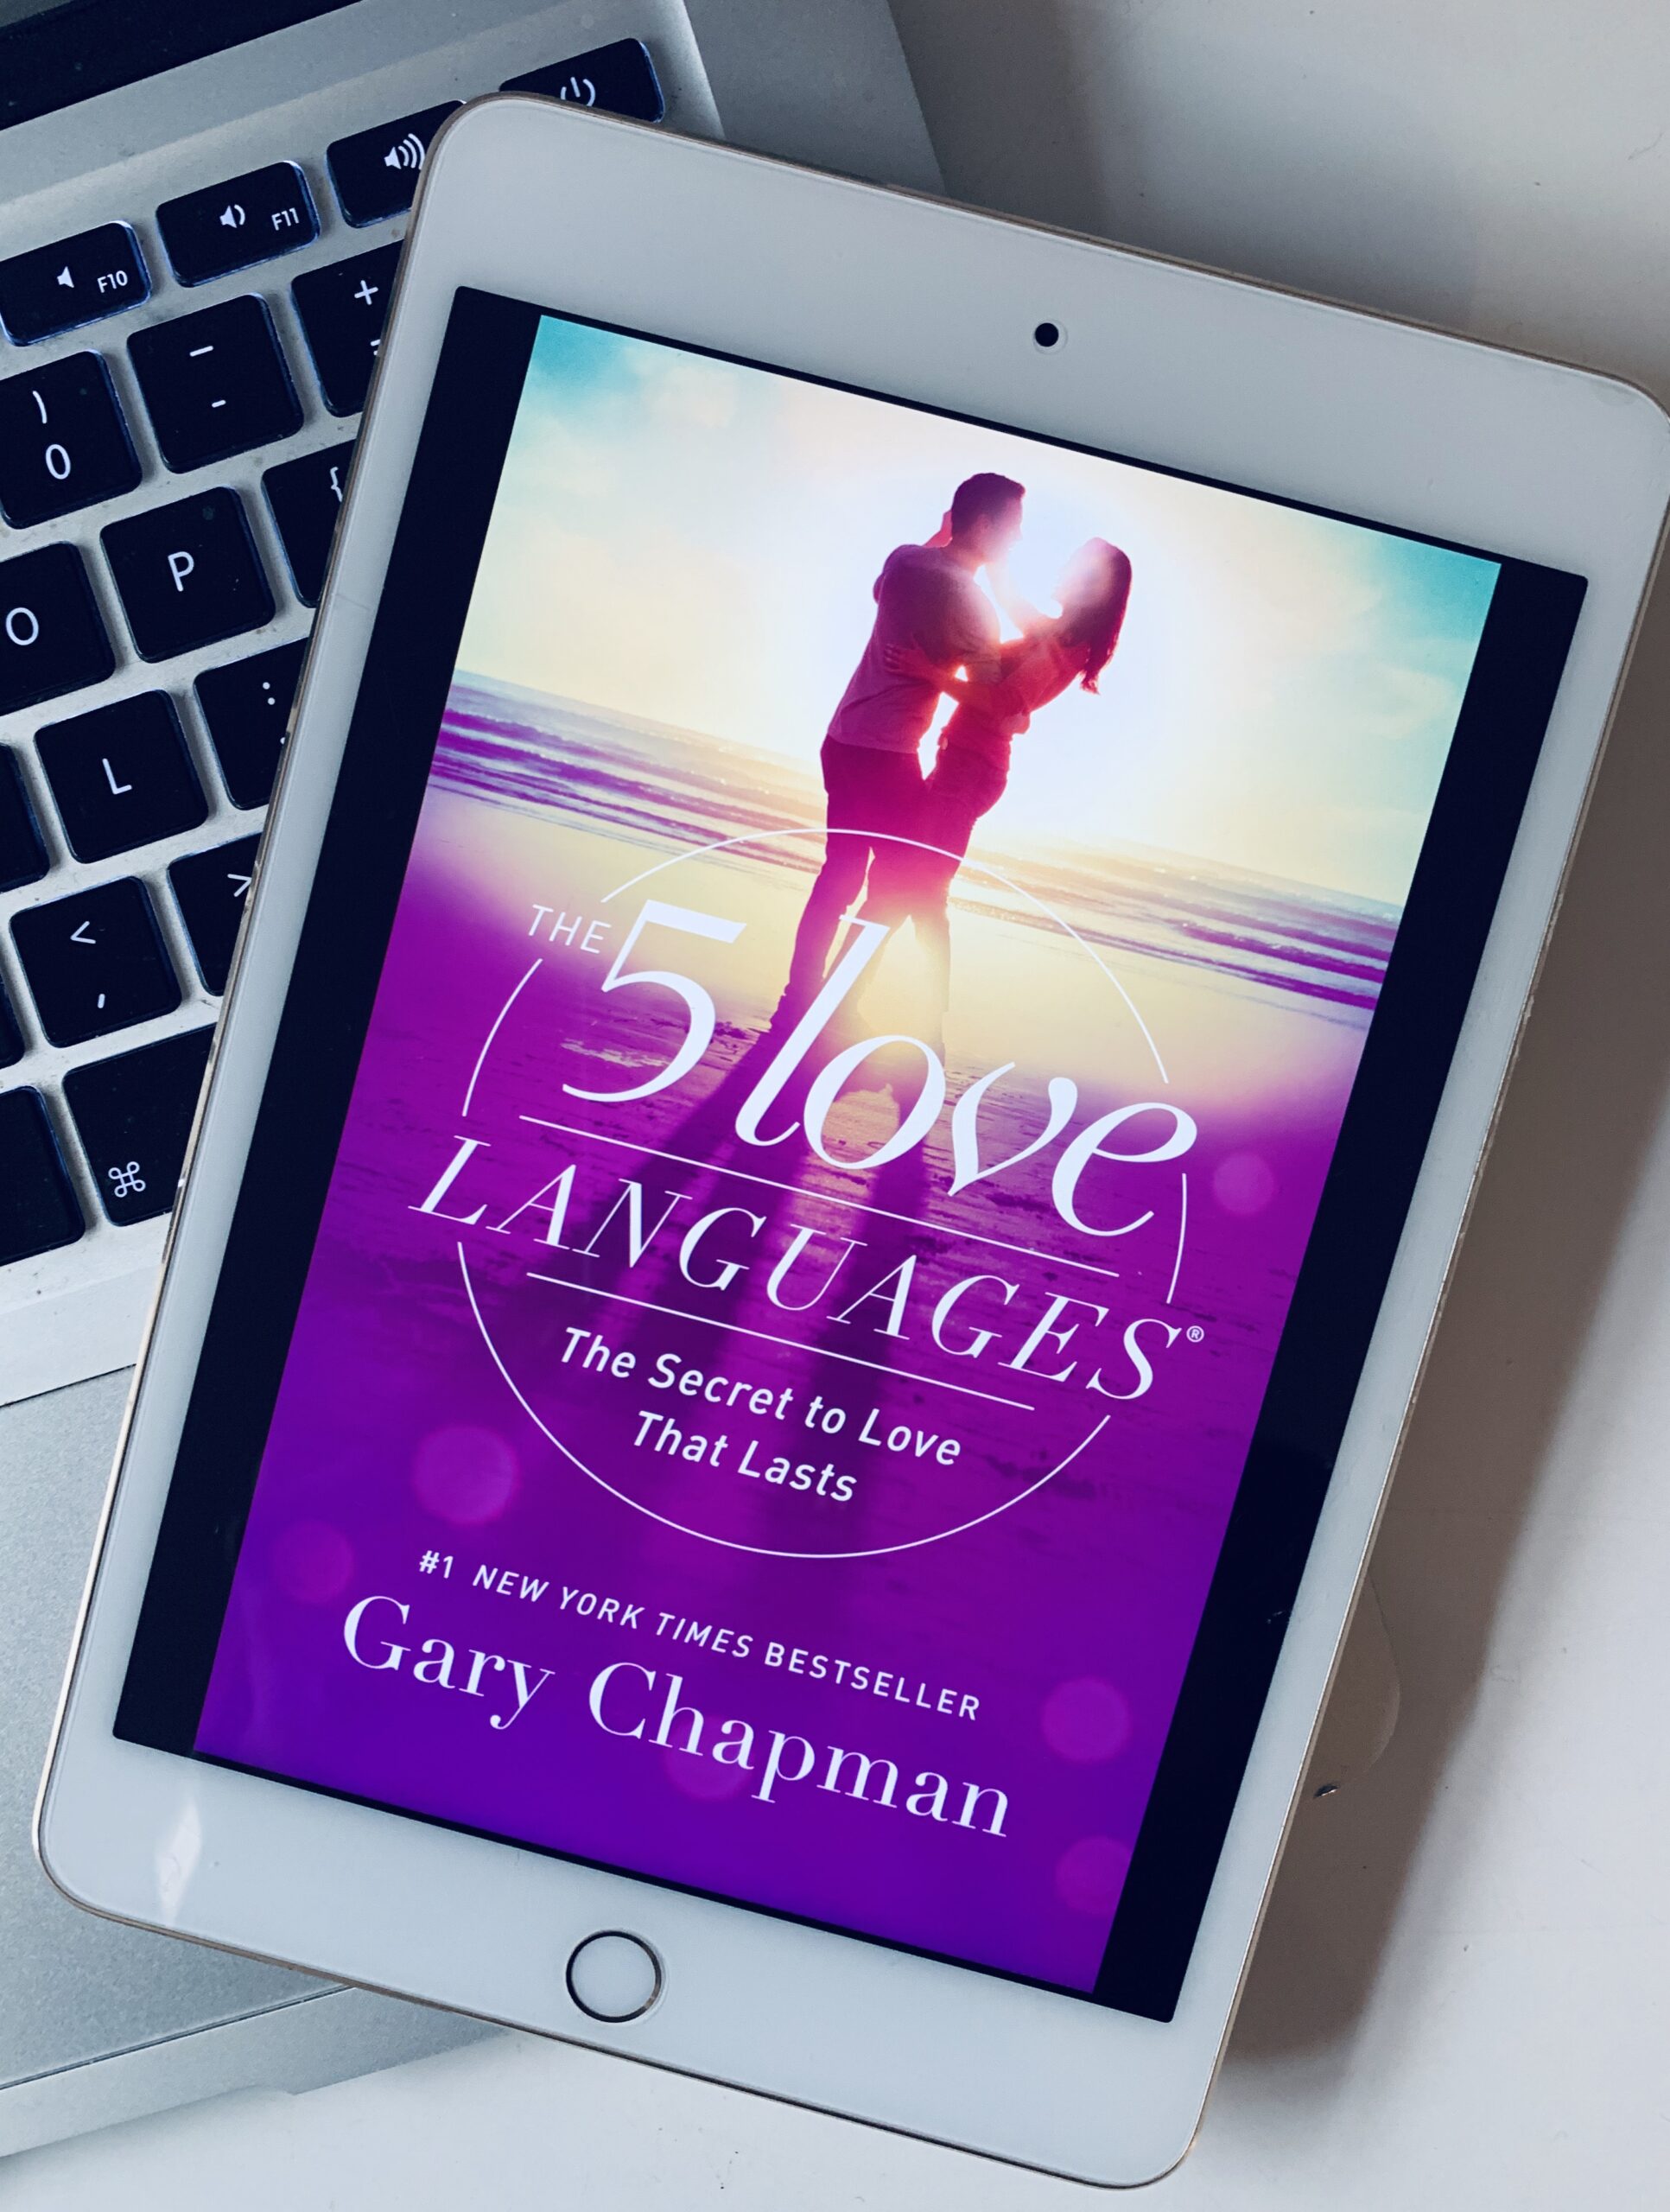 Book Summary - The 5 Love Languages: The Secret to Love that Lasts